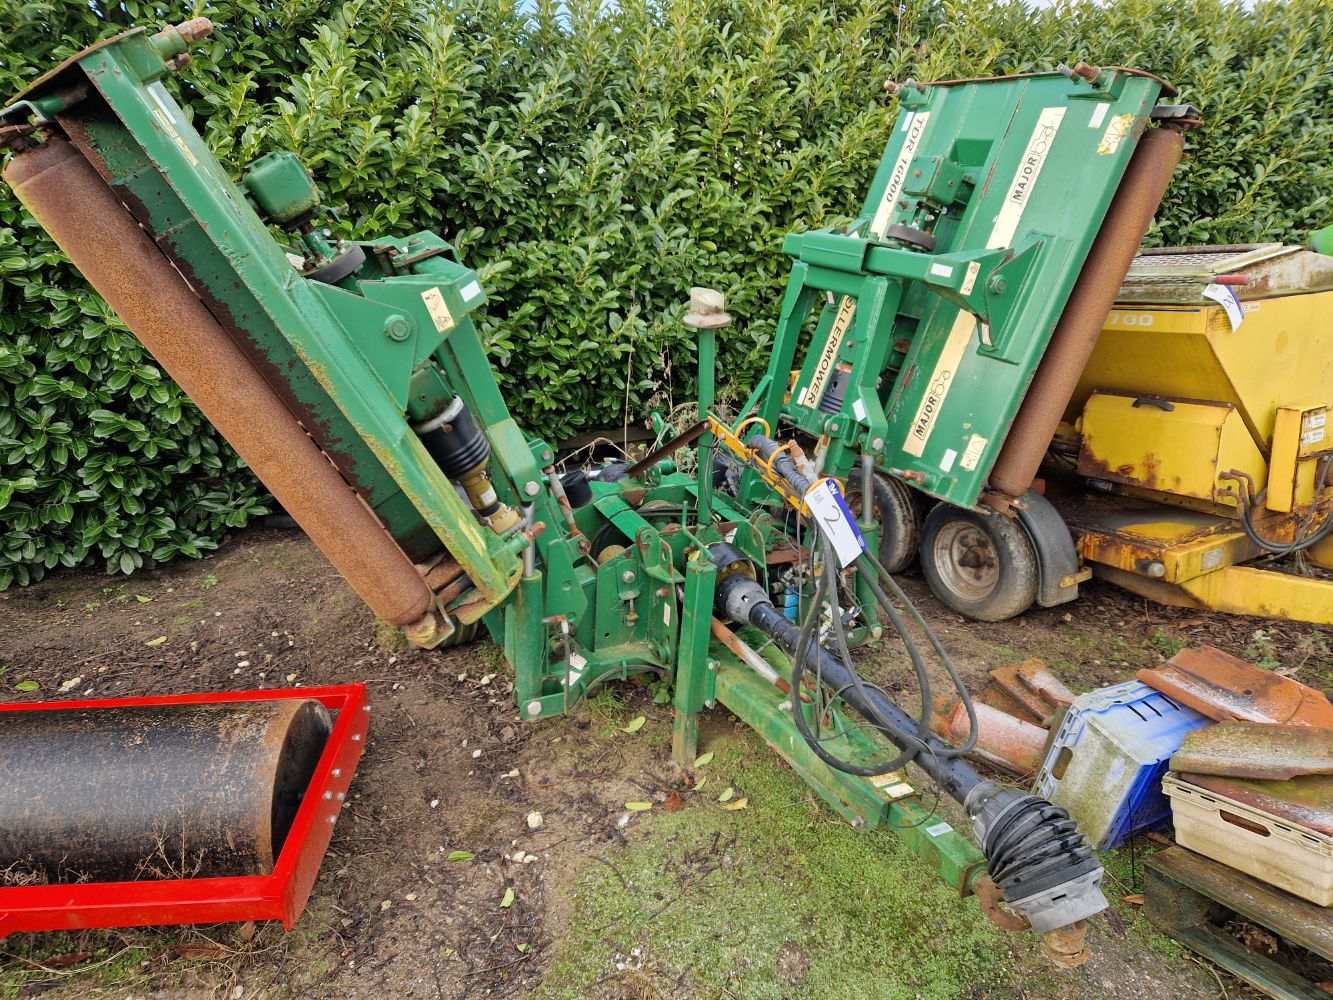 Grounds Maintenance Machinery & Equipment, Residual Stock, Power Tools & Office Furniture